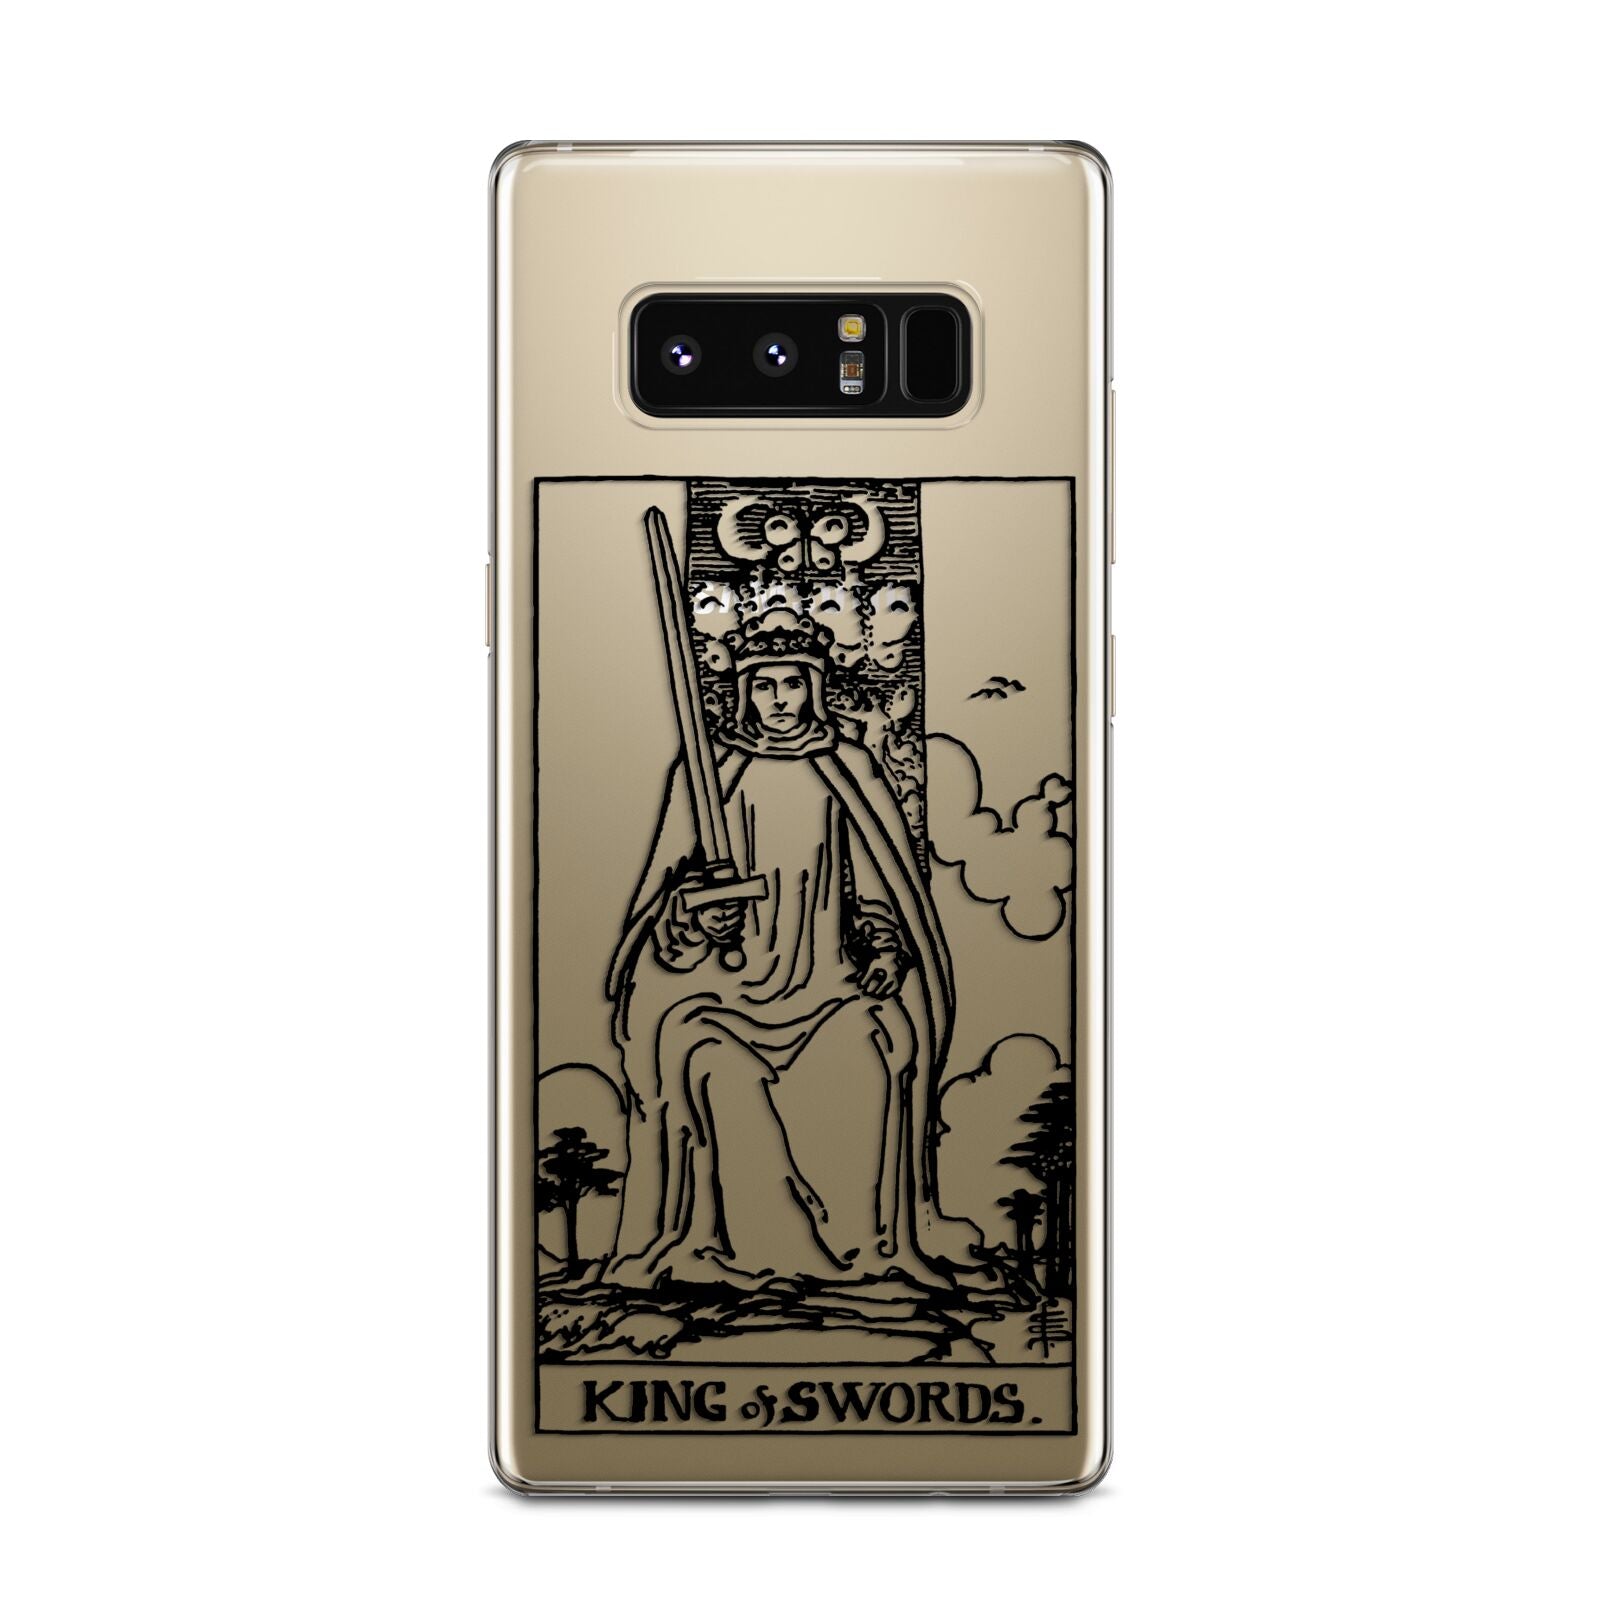 King of Swords Monochrome Samsung Galaxy Note 8 Case